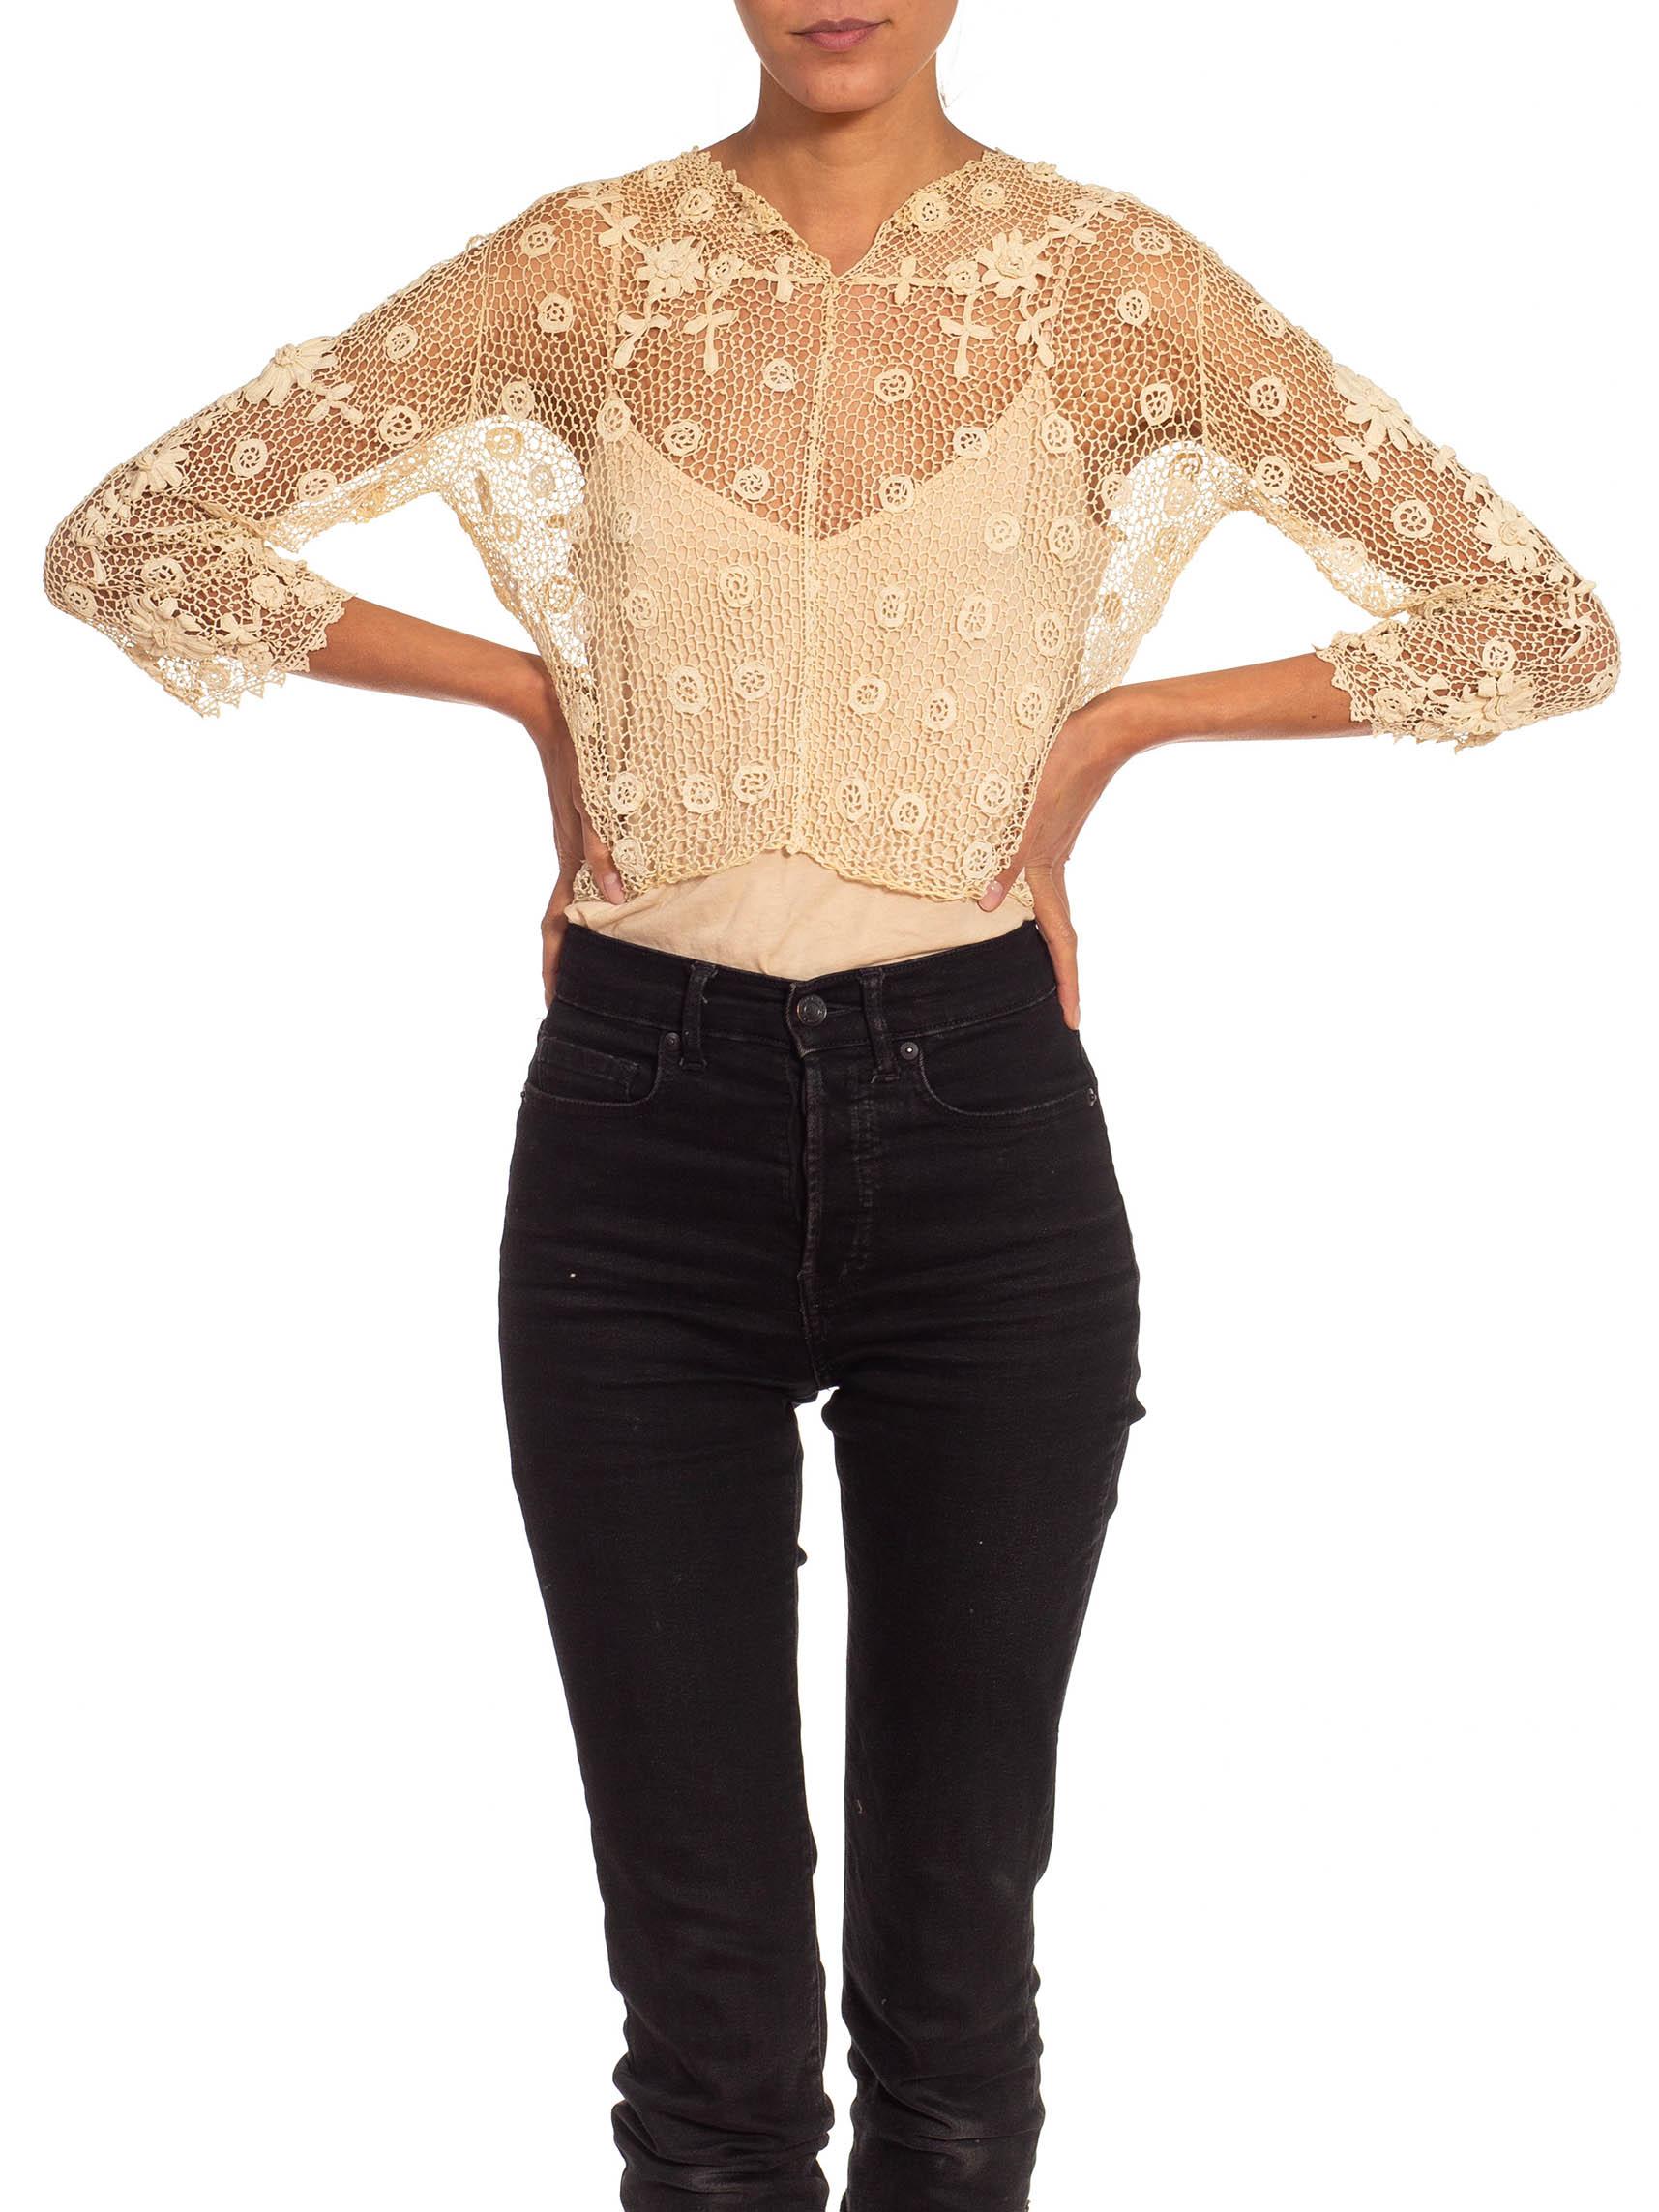 Victorian Cream Cotton Hand Crochet Top With Long Sleeves For Sale 2